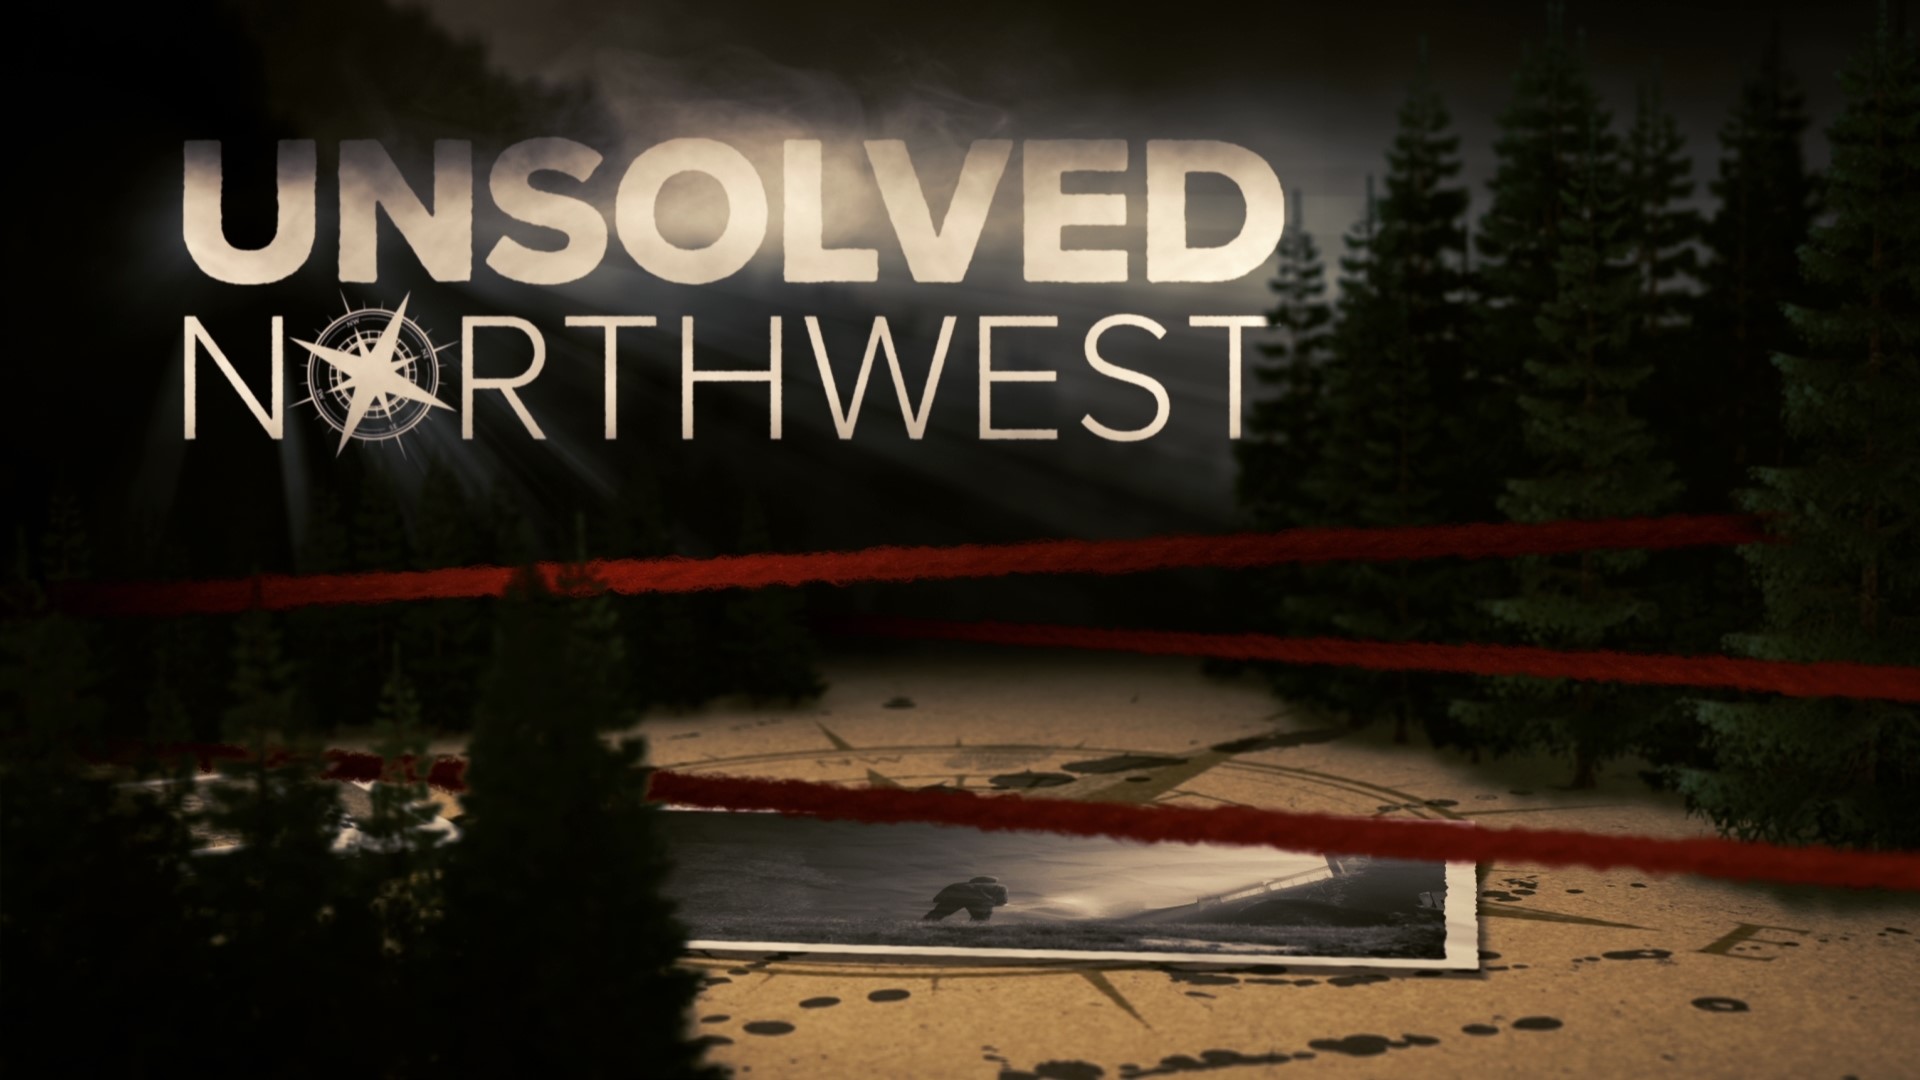 KING 5's true crime series that shines a light on the over 3,000 unsolved homicides in Washington state